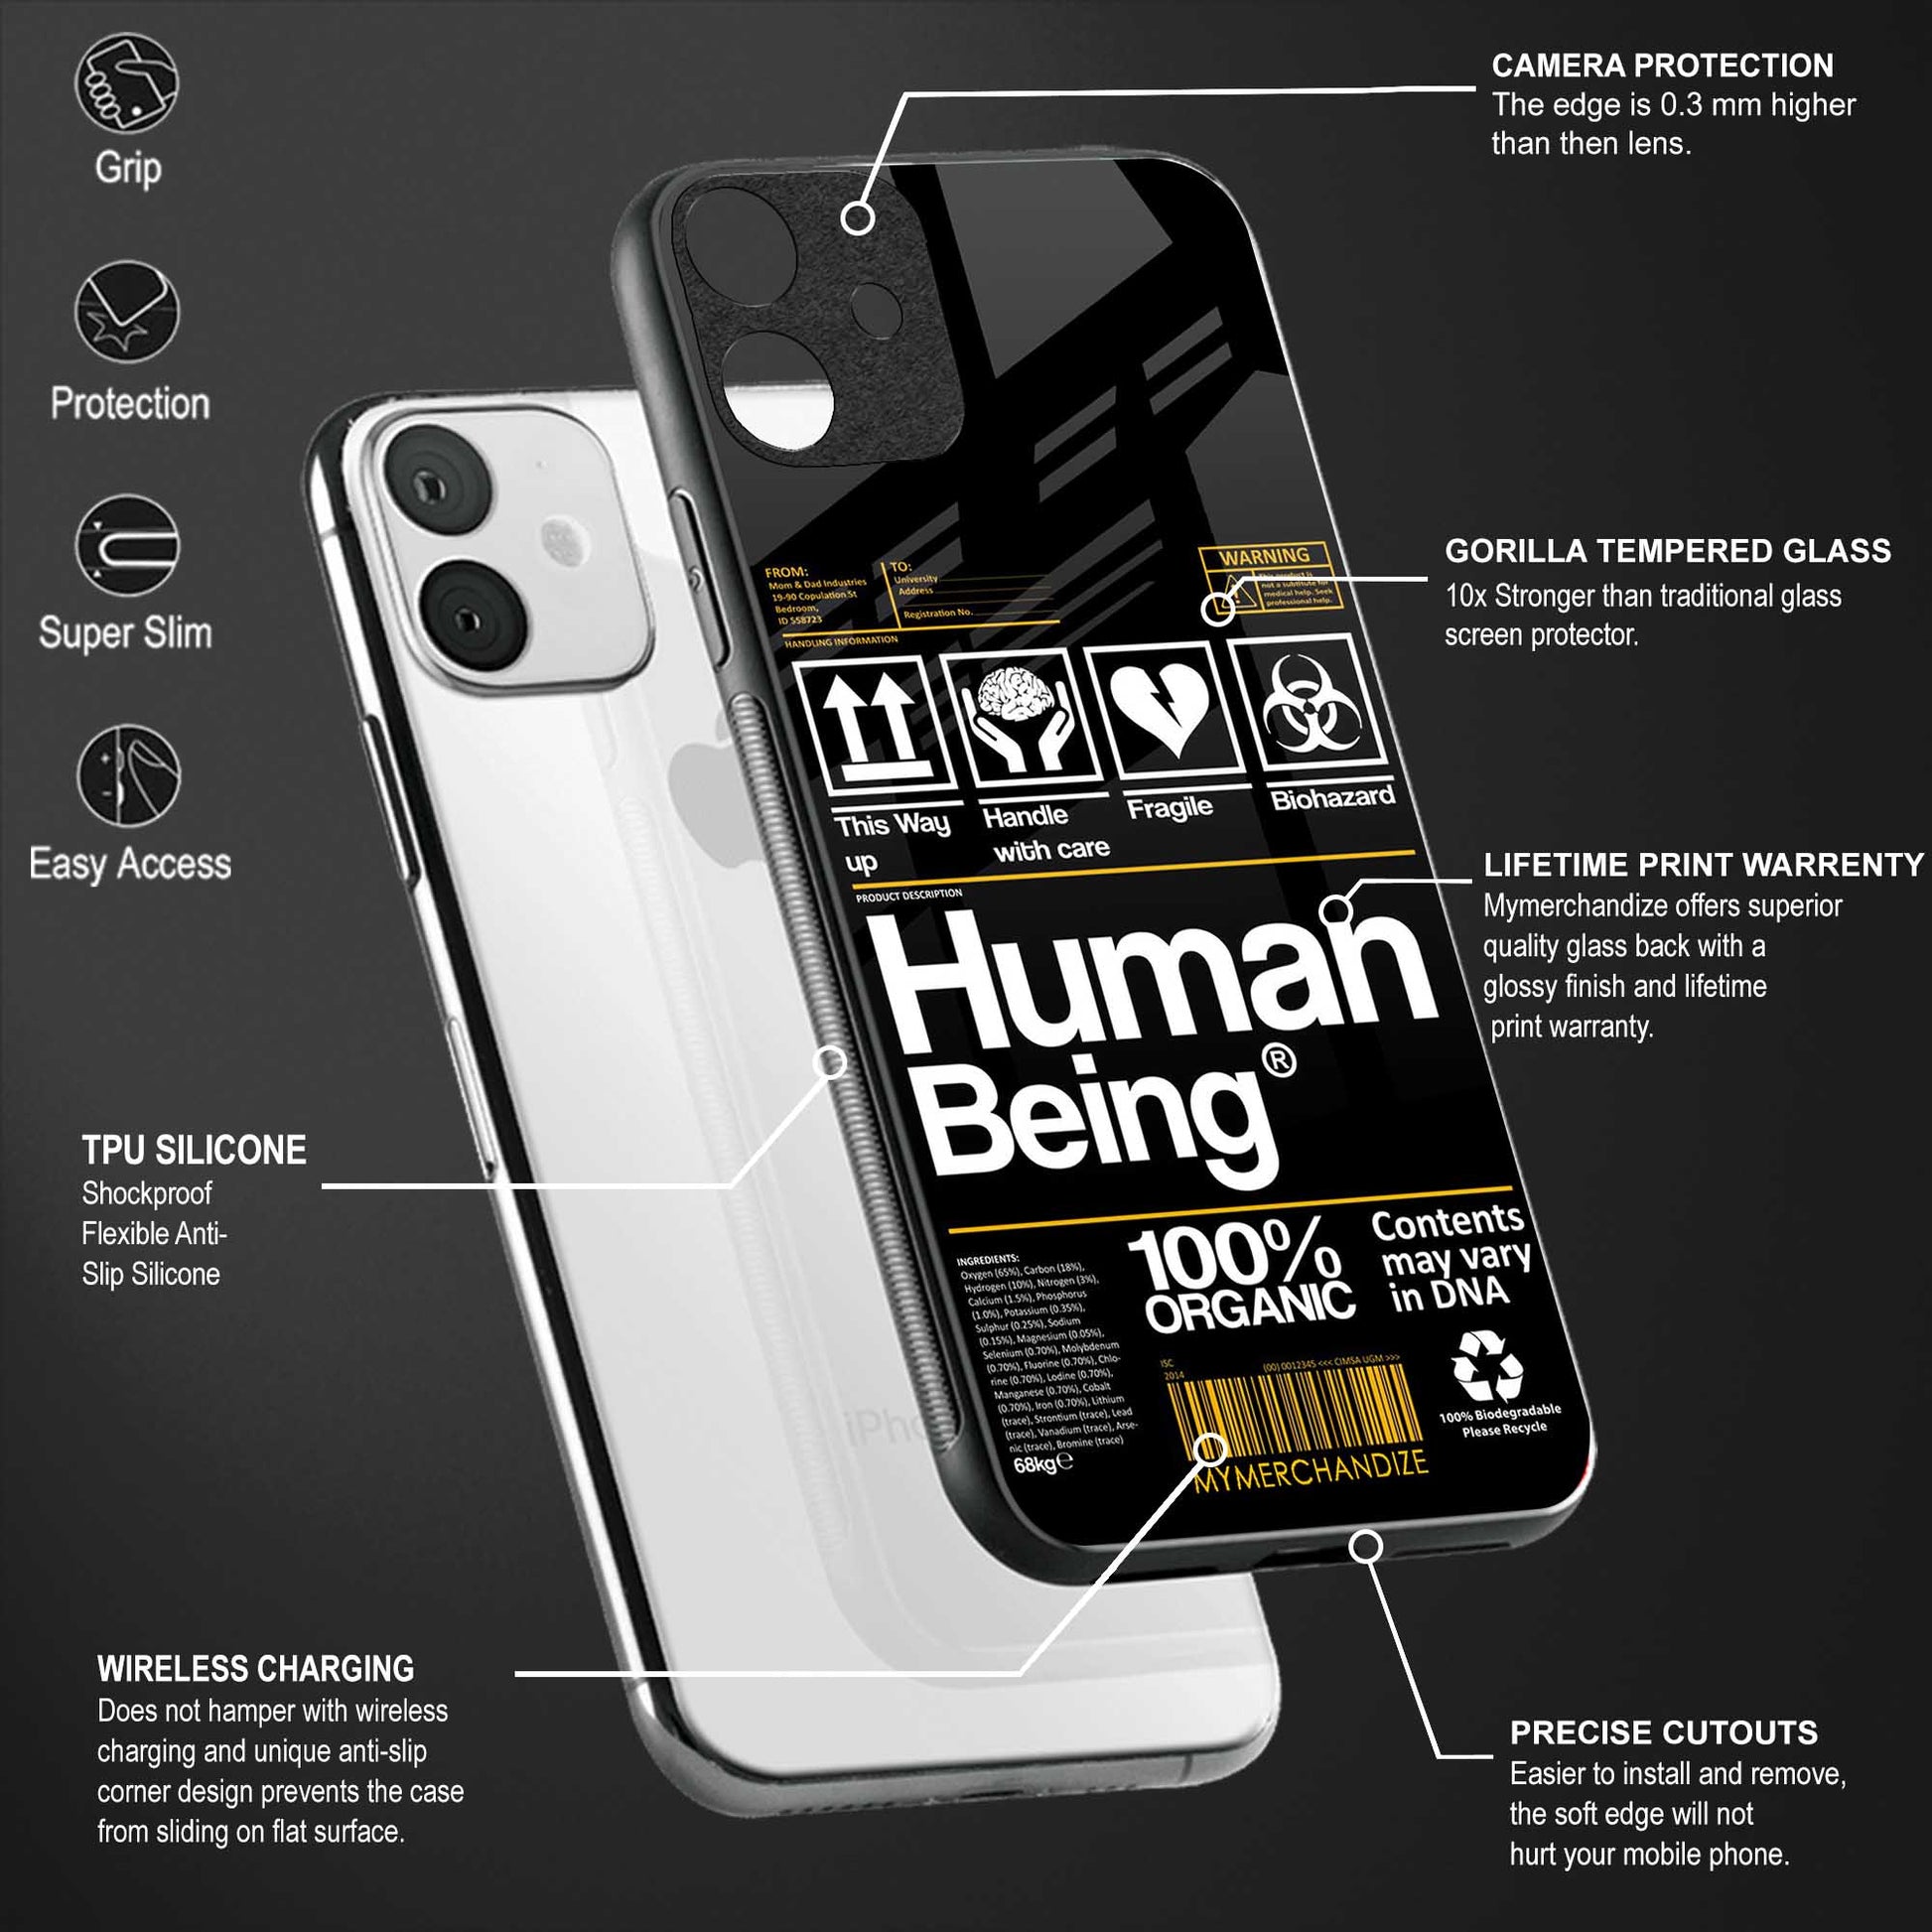 human being label phone cover for iphone 7